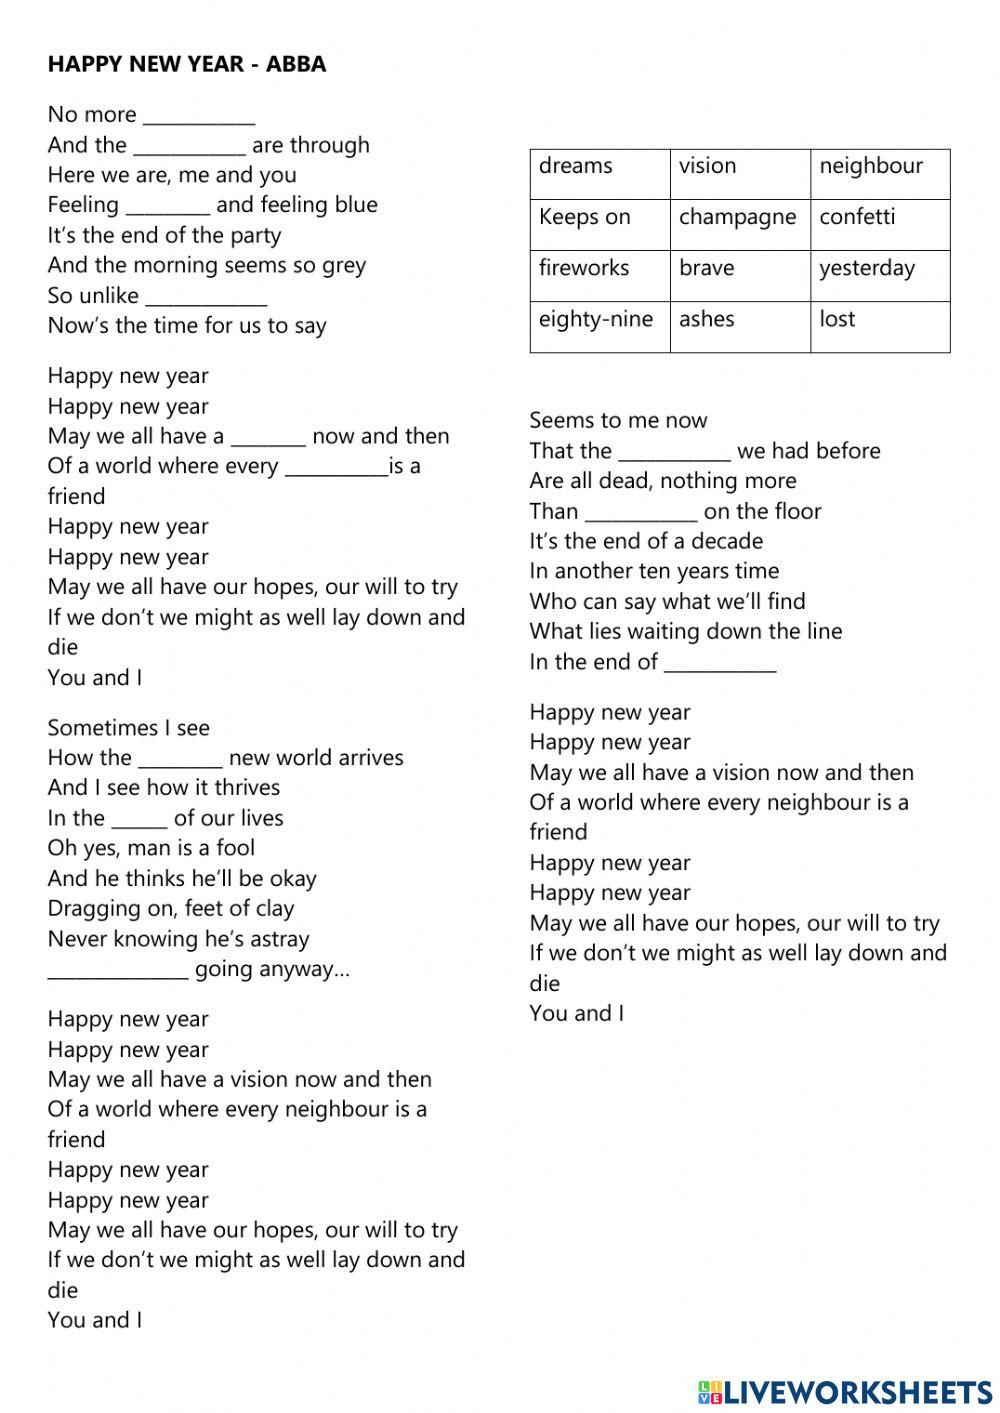 HAPPY NEW YEAR - ABBA online exercise for | Live Worksheets